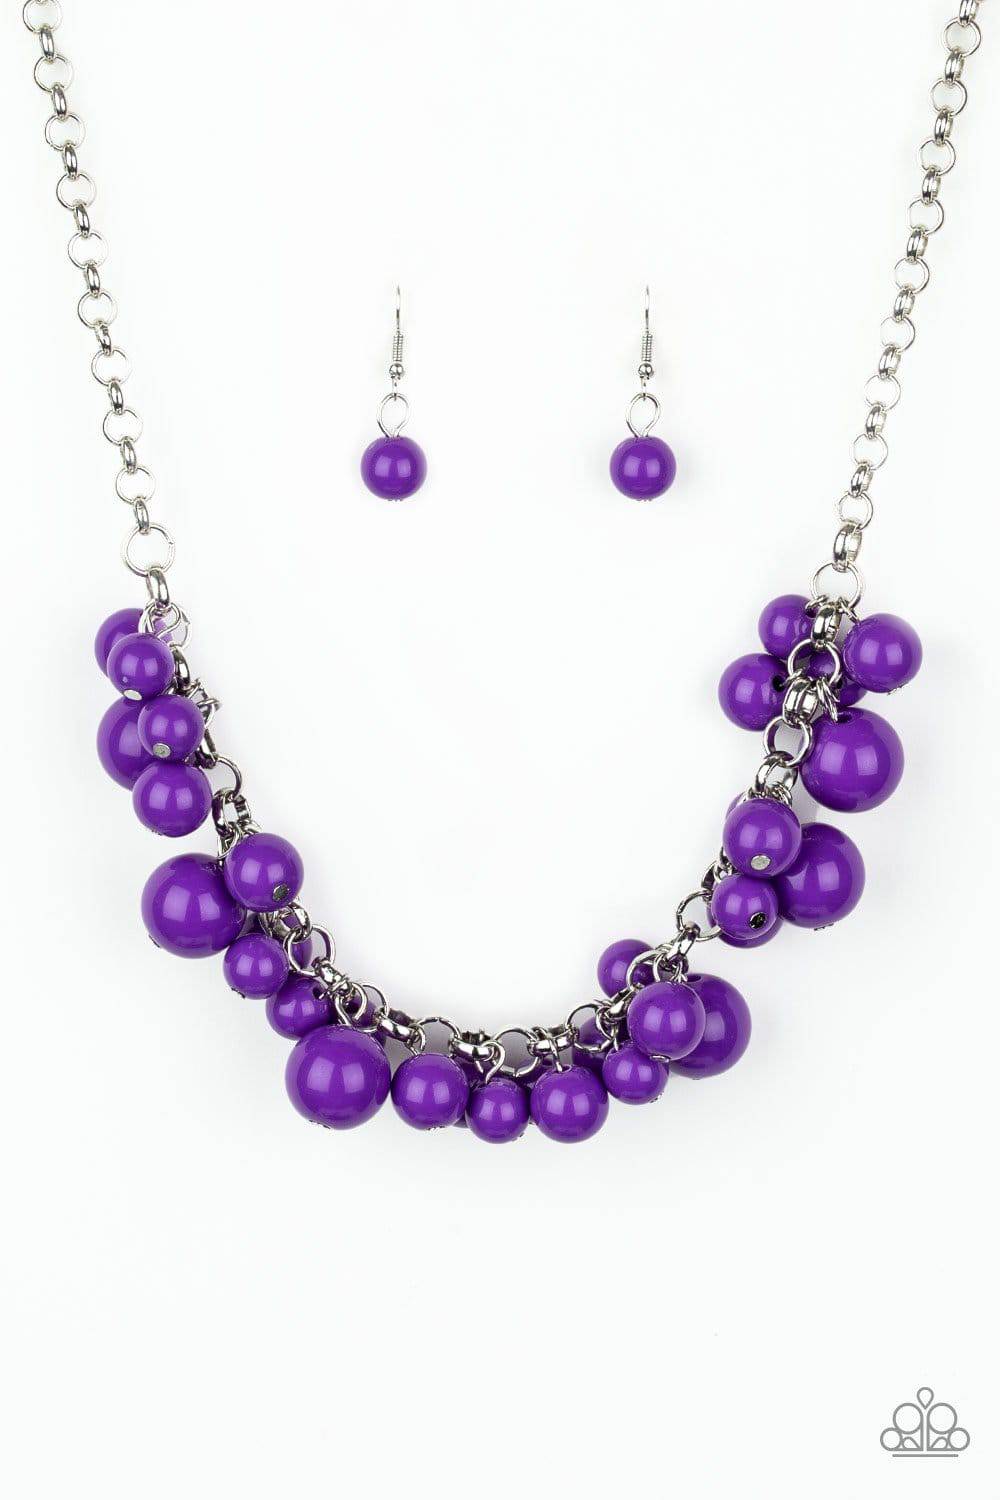 A275 - Walk This BROADWAY Necklace by Paparazzi Accessories on Fancy5Fashion.com